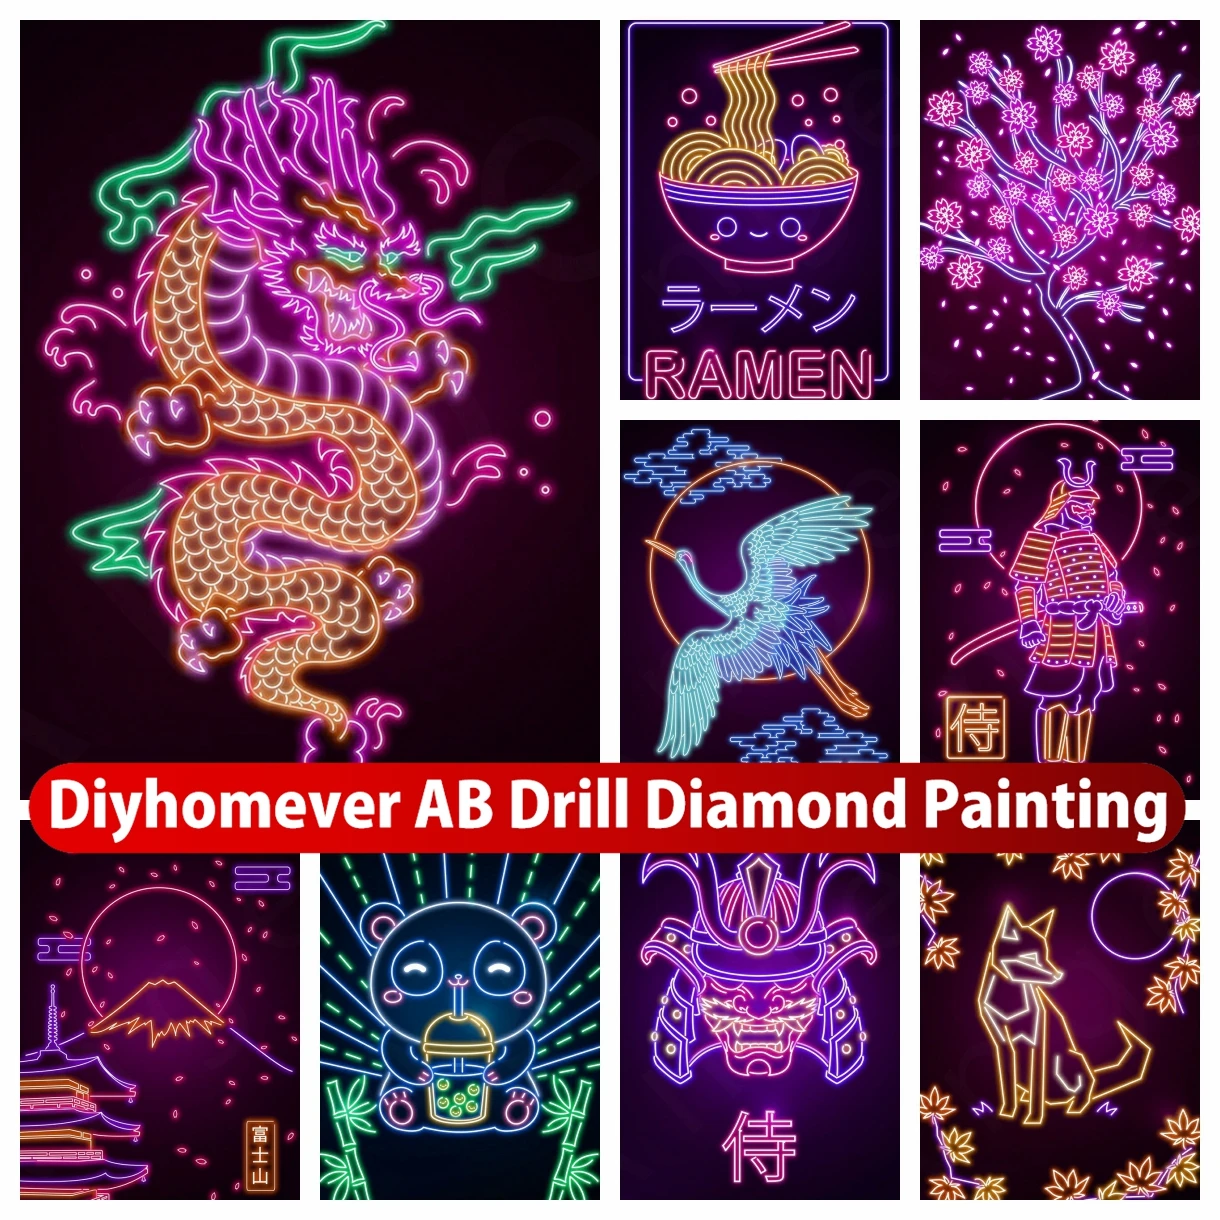 

Japanese Animal Neon DIY AB Diamond Painting Embroidery Fantasy Landscape Cross Stitch Mosaic Picture Handmade Home Decor Gift